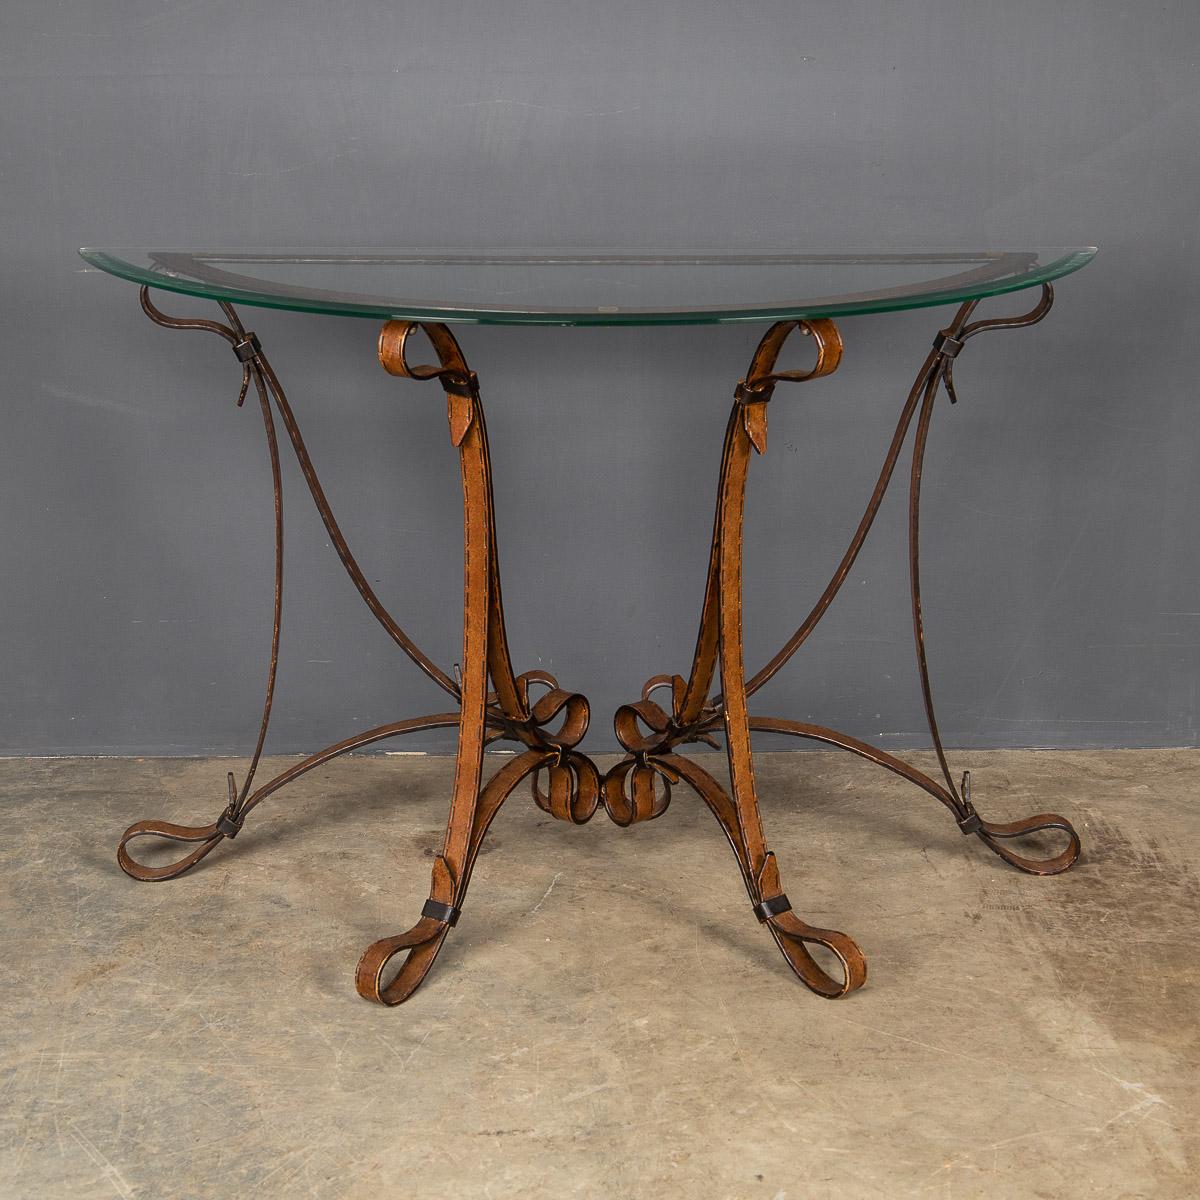 A sturdy cold painted wrought iron console, with stitched strap and buckle detail and a bevelled glass top, made in the 1980's.

Condition
In Good Condition - wear consistent with age.

Size
body only:
Width: 98cm
Depth: 34cm
Height: